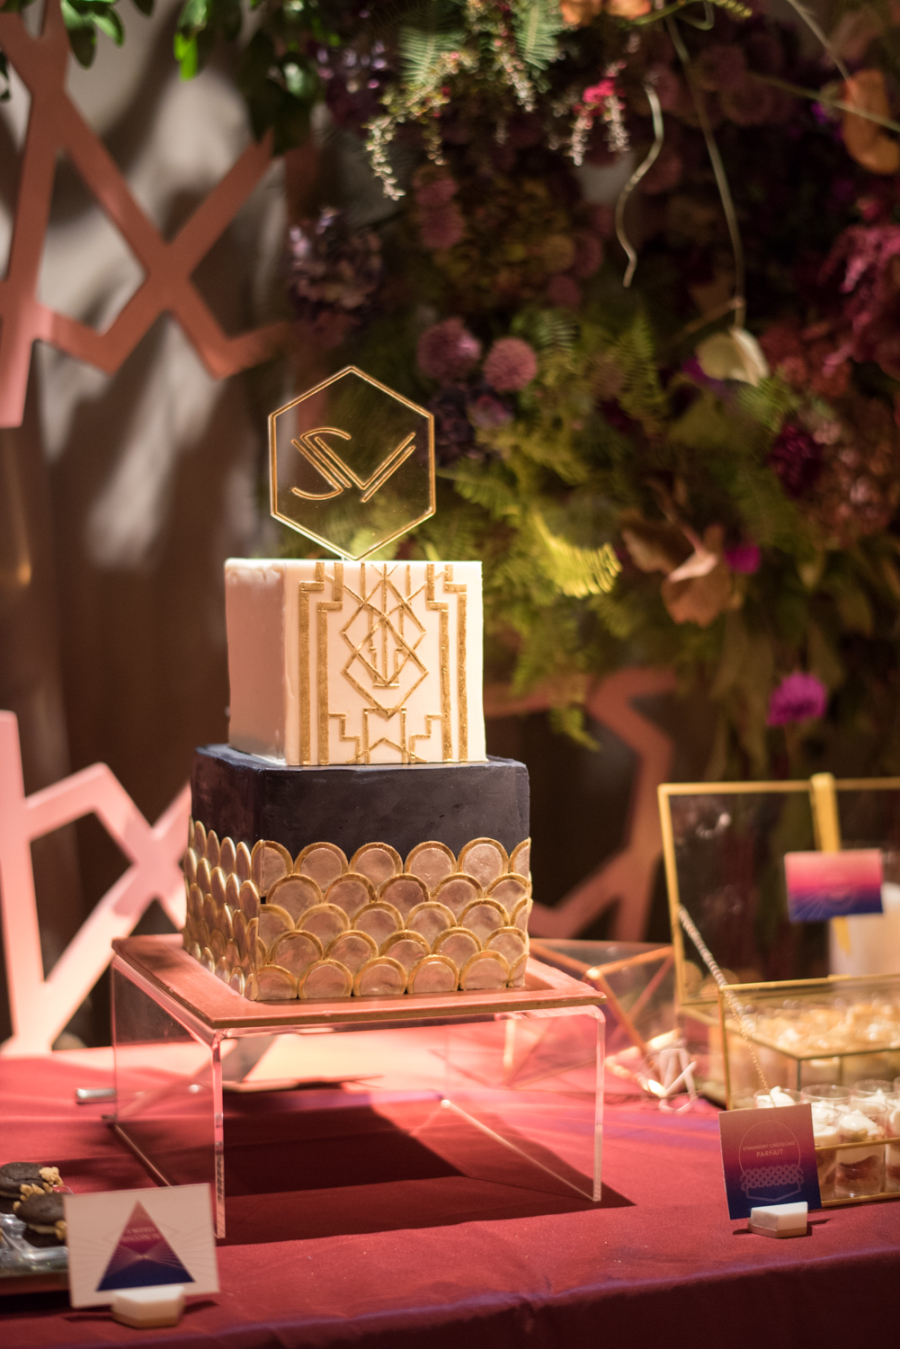 The wedding cake was art deco, a square one with gold art deco details and an acrylic topper